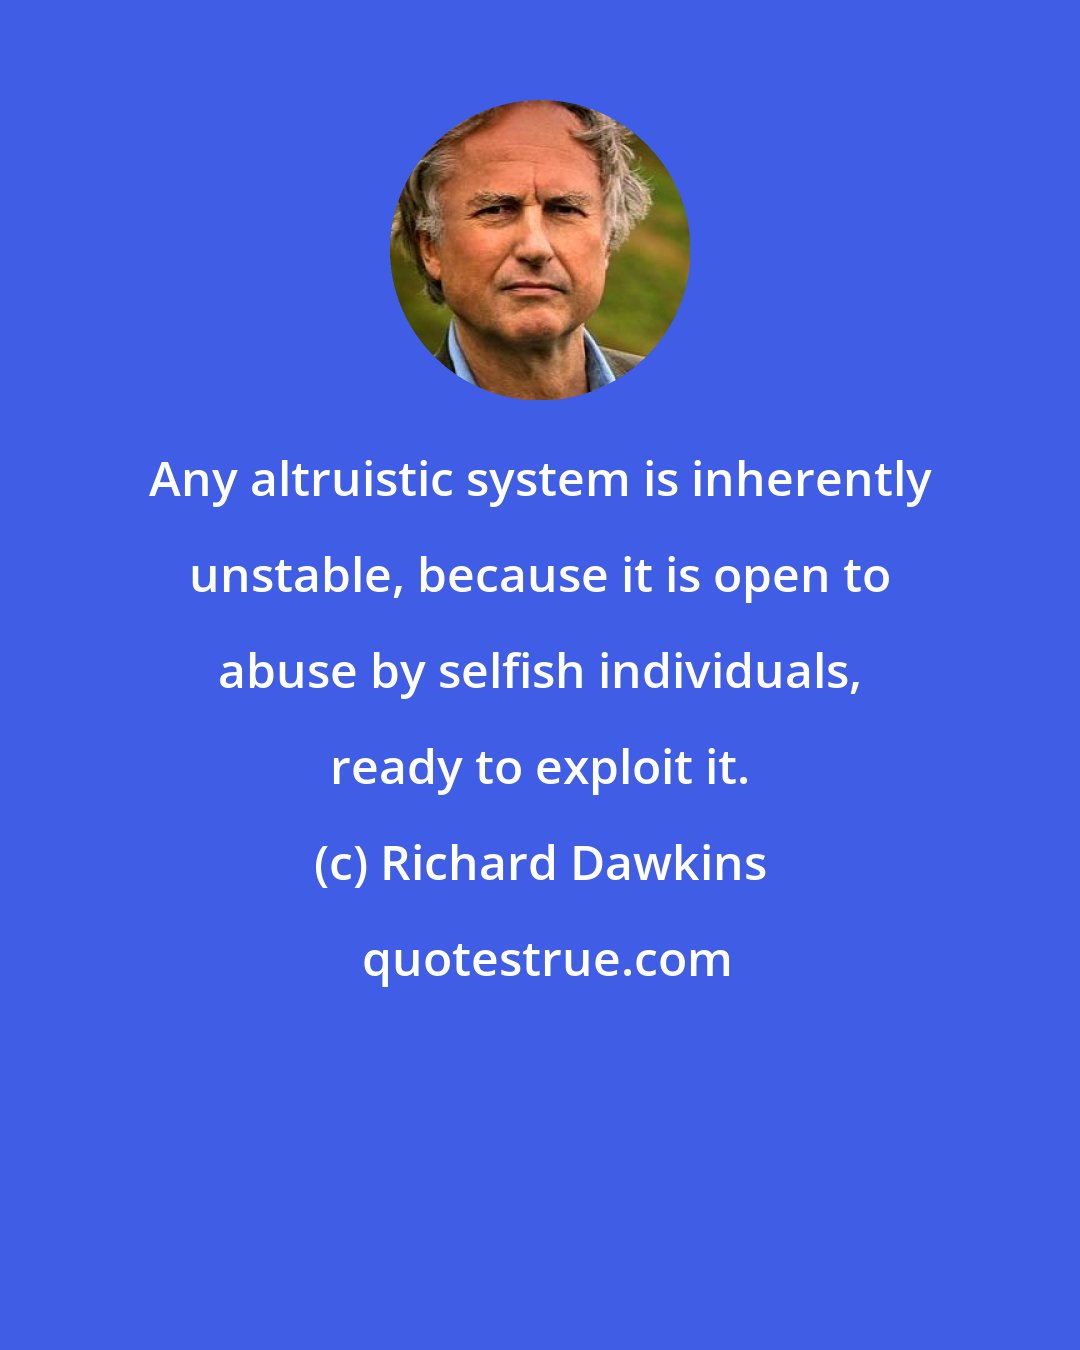 Richard Dawkins: Any altruistic system is inherently unstable, because it is open to abuse by selfish individuals, ready to exploit it.